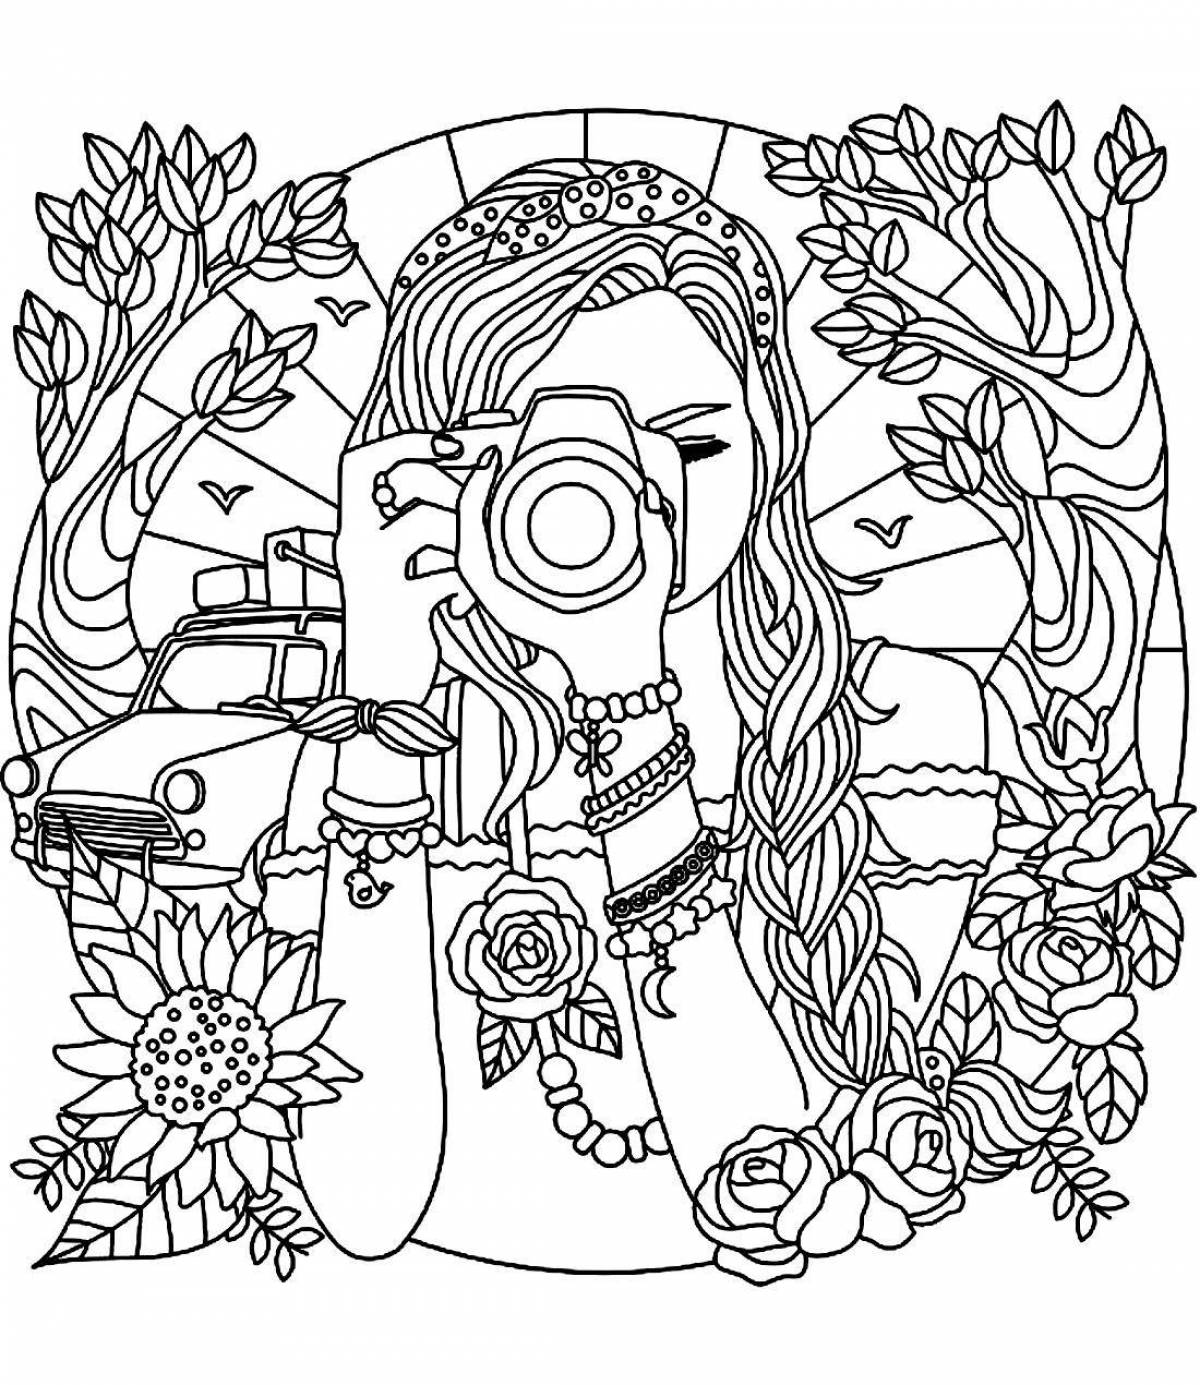 Coloring pages for girls 15-17 years old